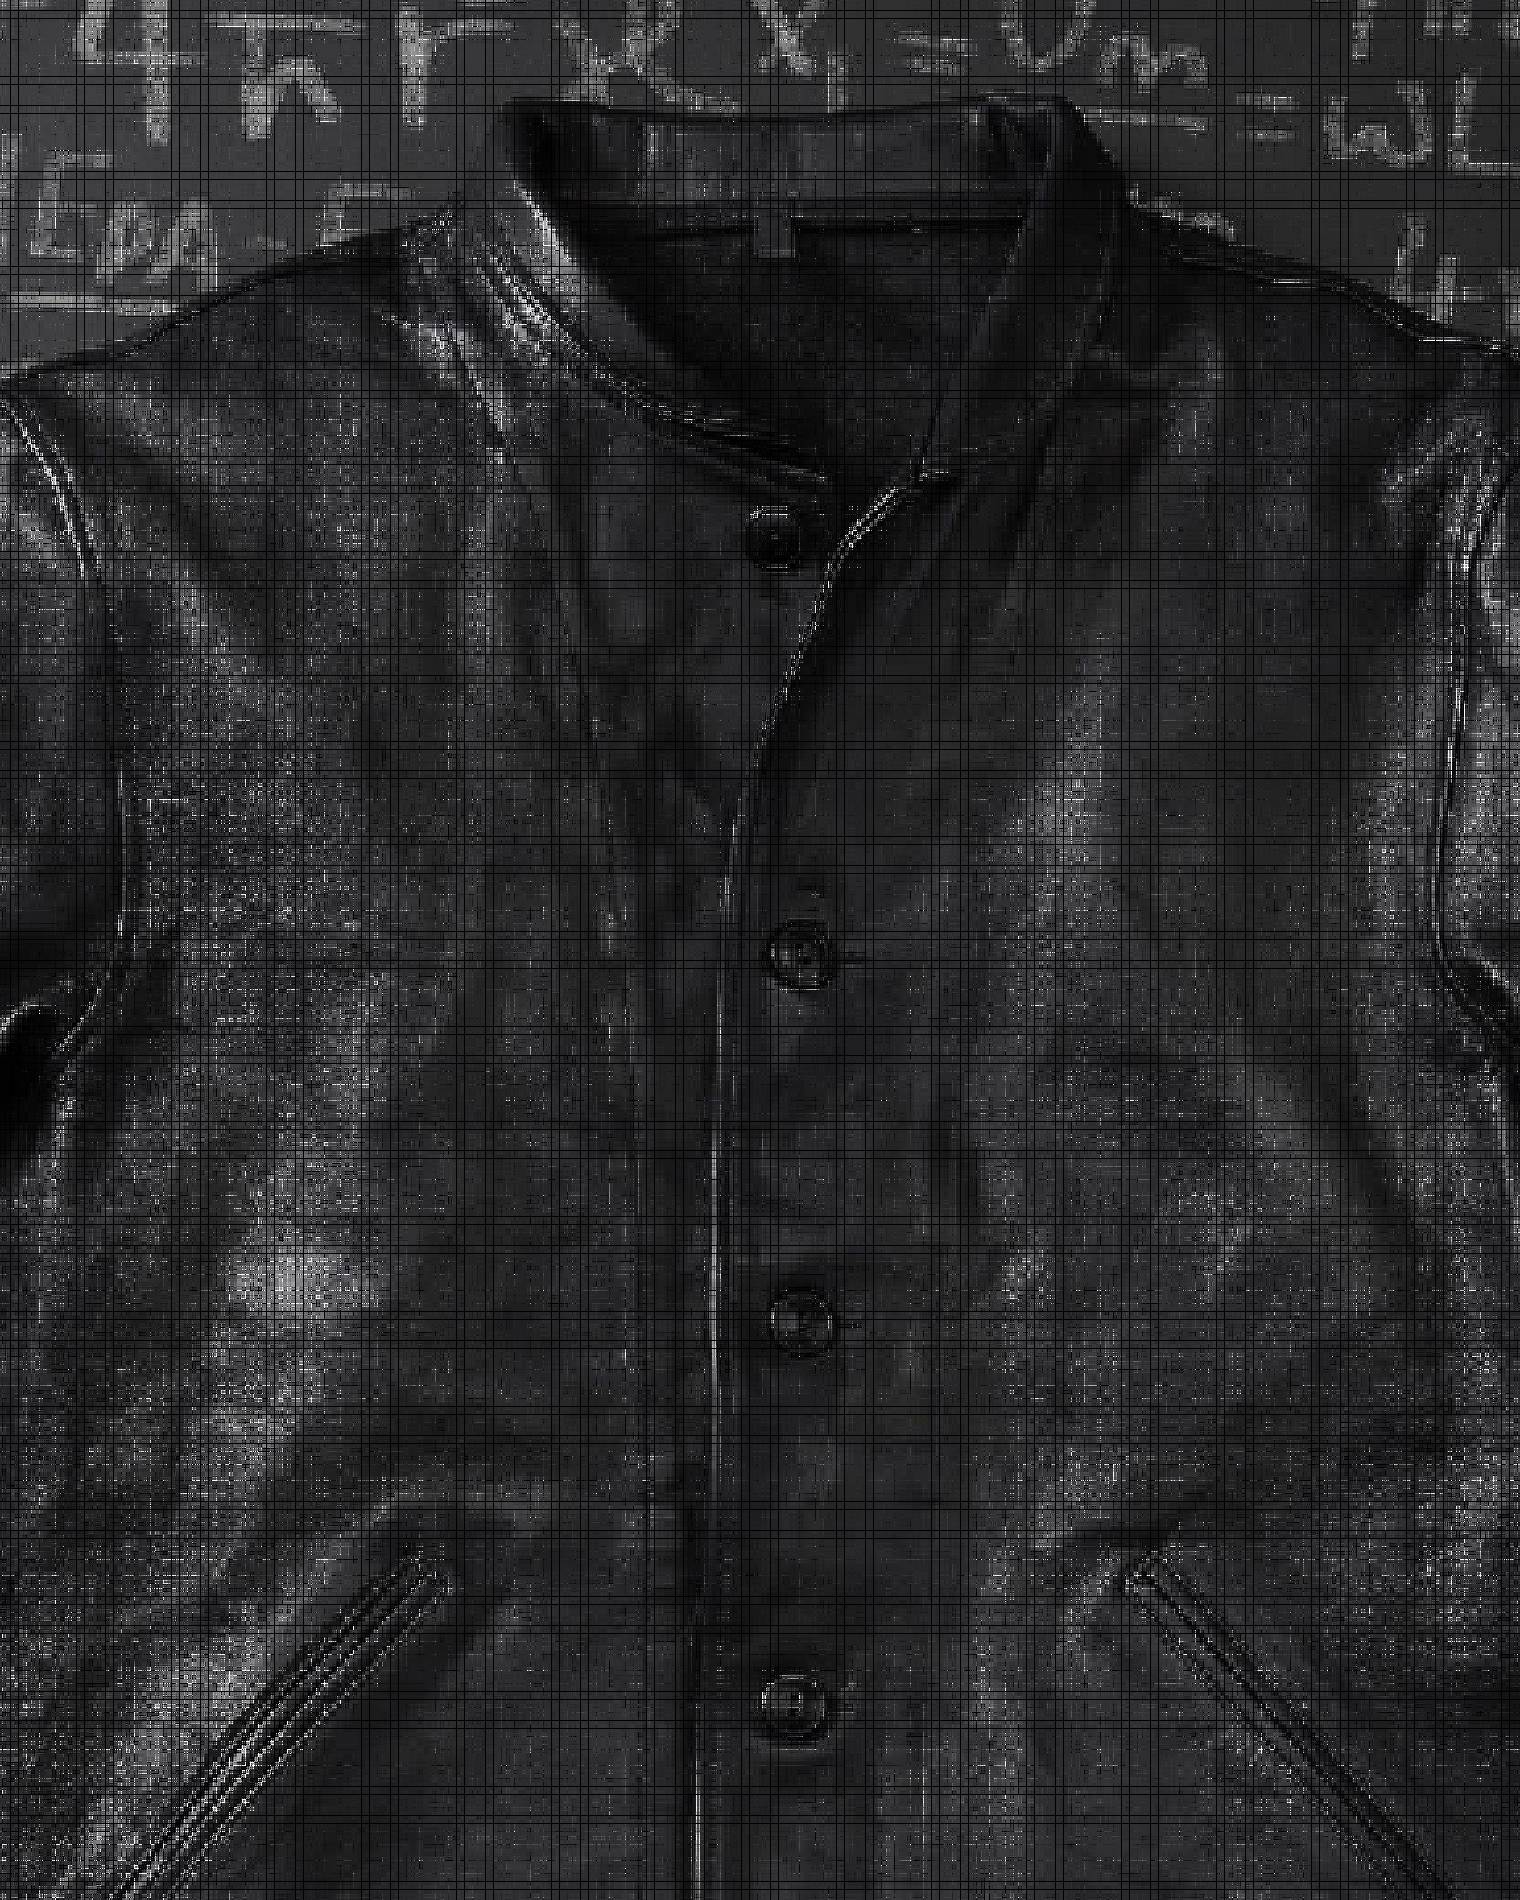 Einstein's original Levi's® Menlo Cossack leather jacket laid on top of a chalkboard background with numbers and equations.